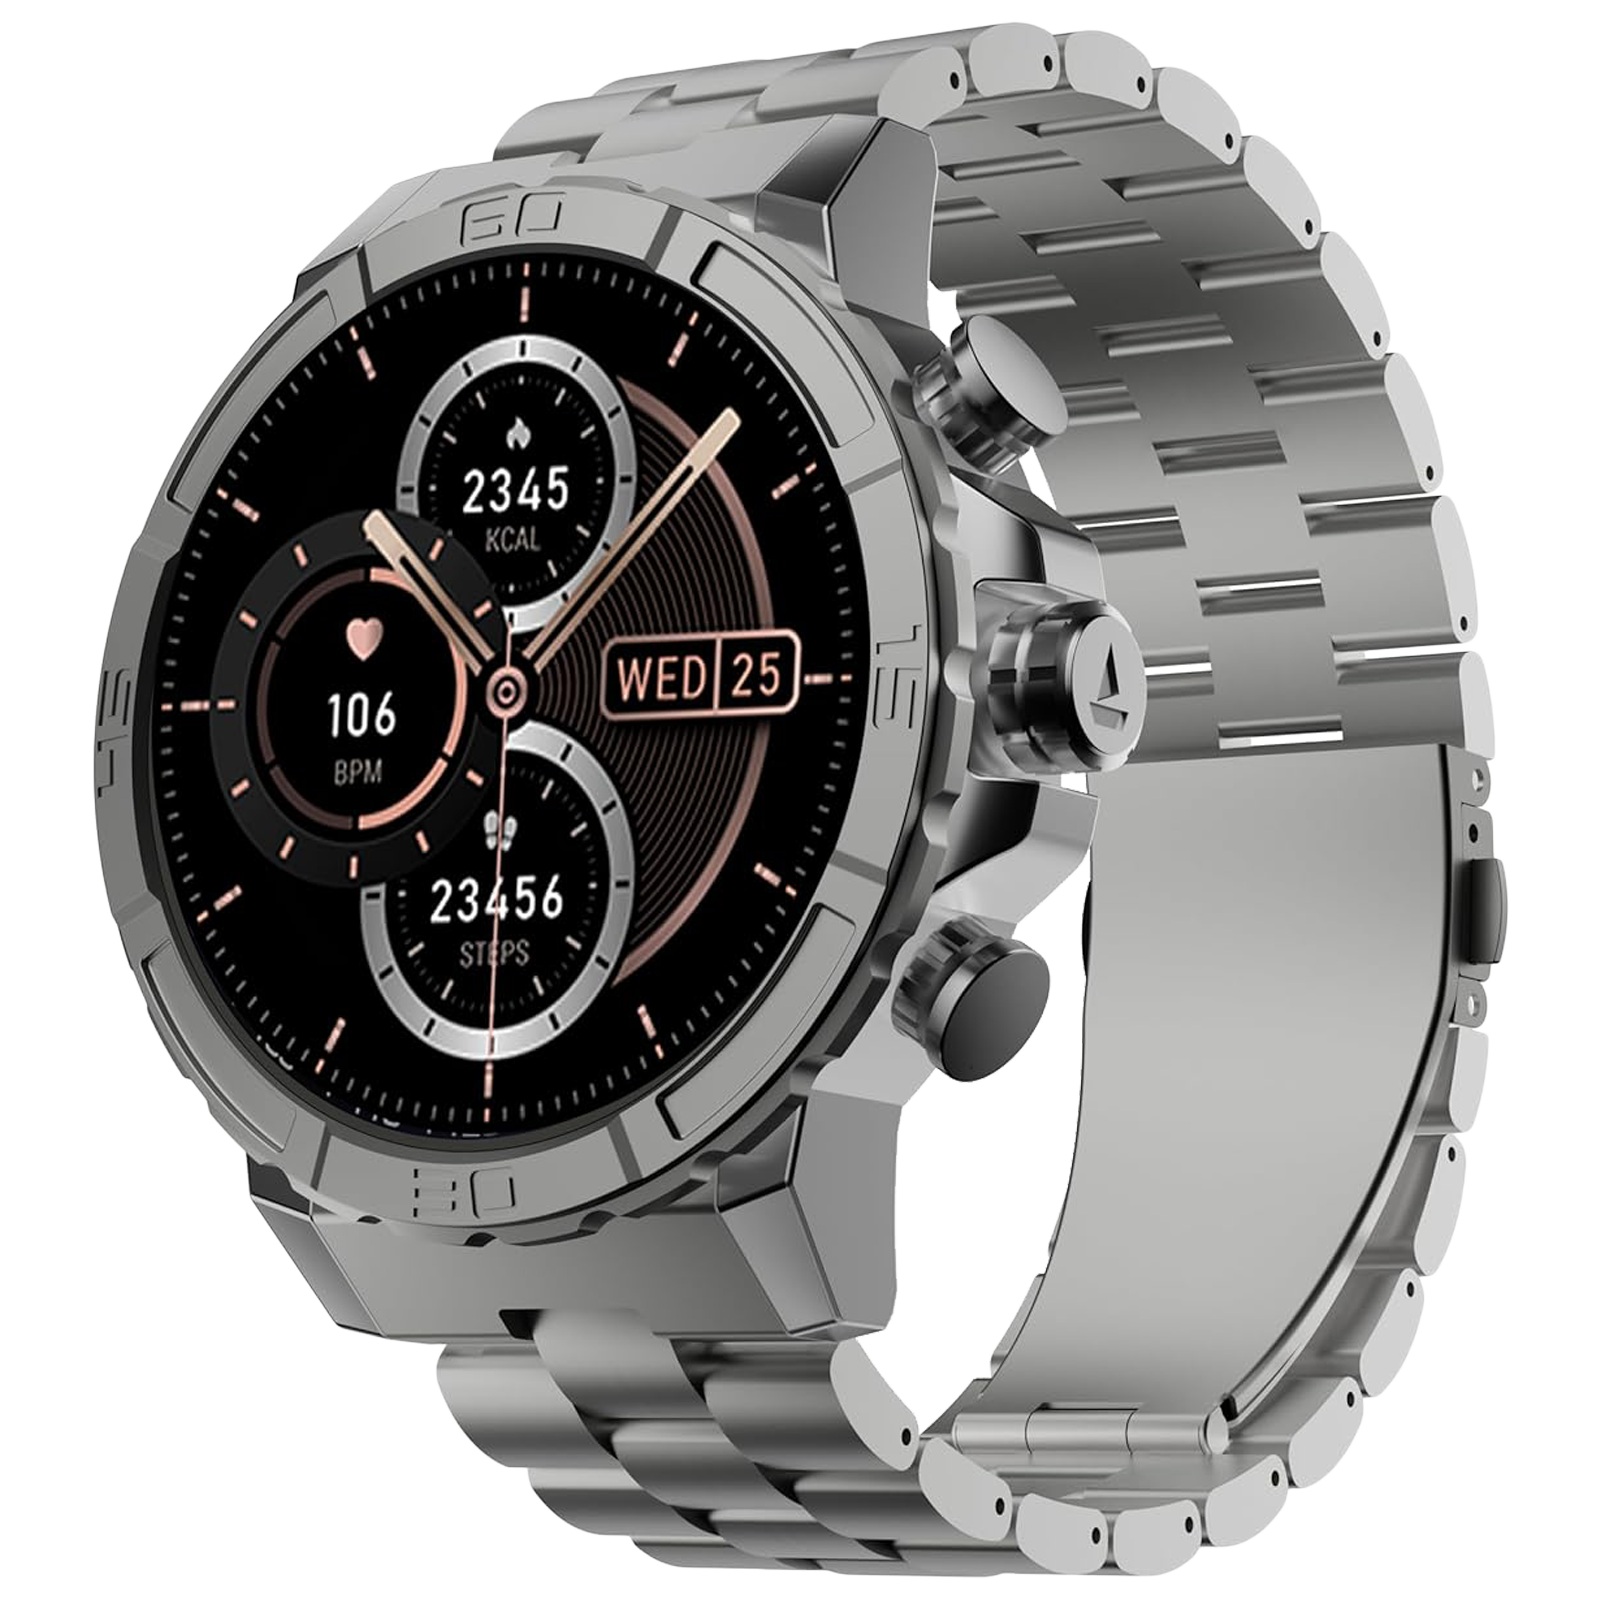 boAt Enigma X700 Smartwatch with Bluetooth Calling (38mm AMOLED Display, IP67 Sweat Resistant, Silver Chrome Strap)